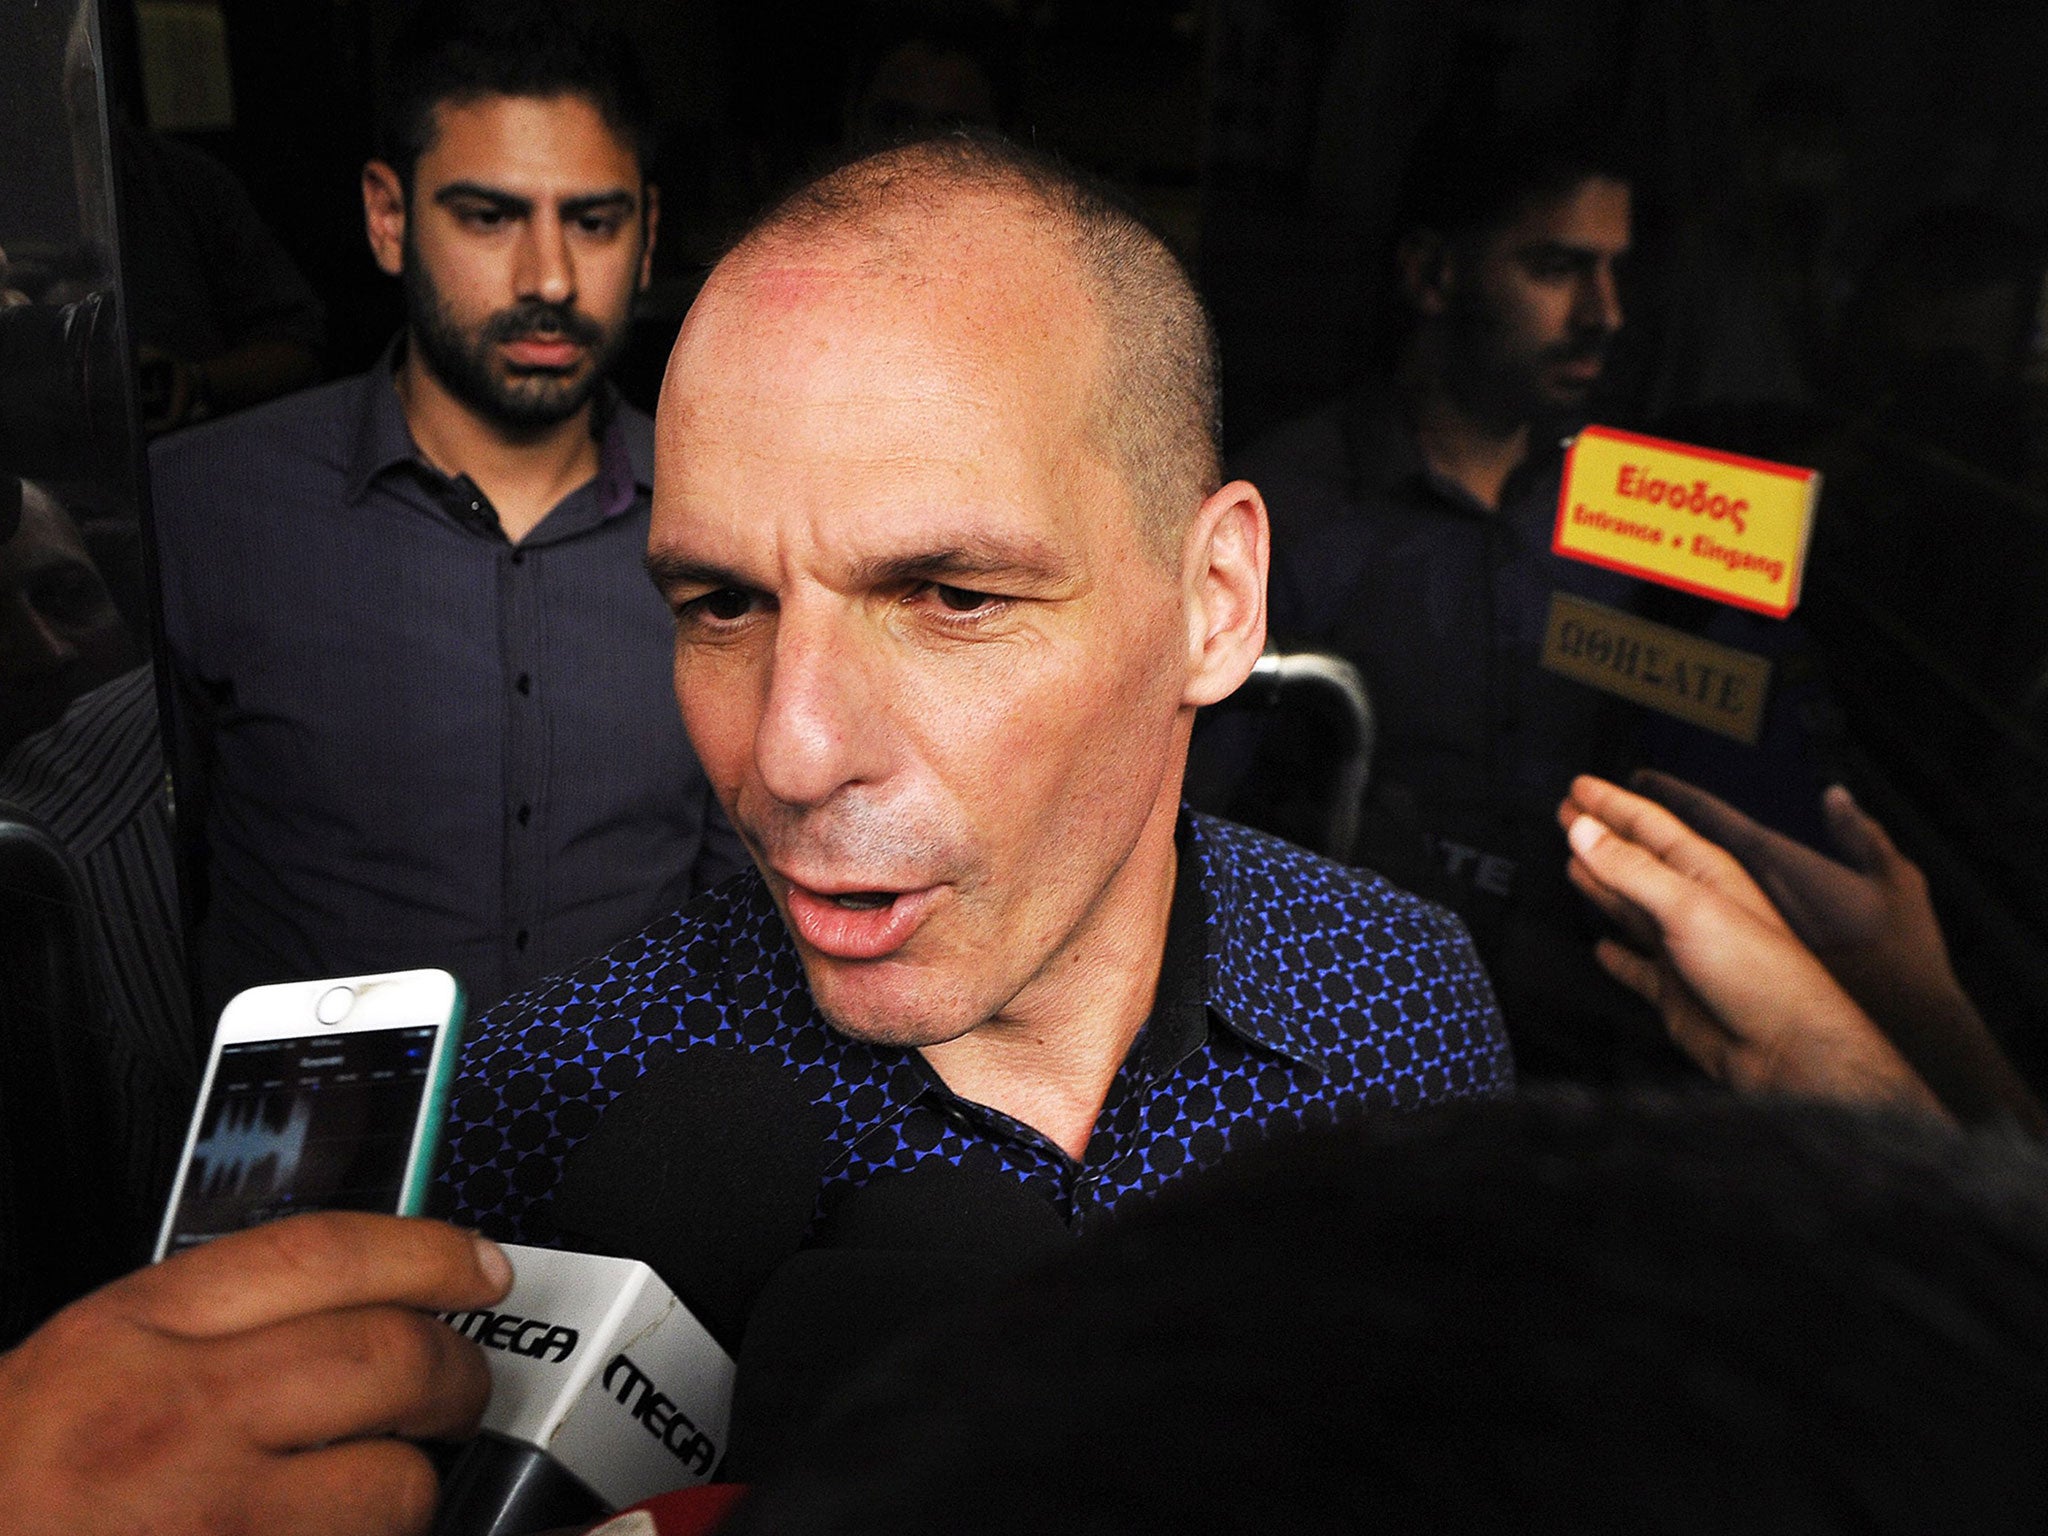 Greece Finance Minister Yanis Varoufakis said he is resigning, making the announcement in a tweet and on his personal webpage. The announcement came hours after the ballot count of the referendum on Greece's bailout package was completed